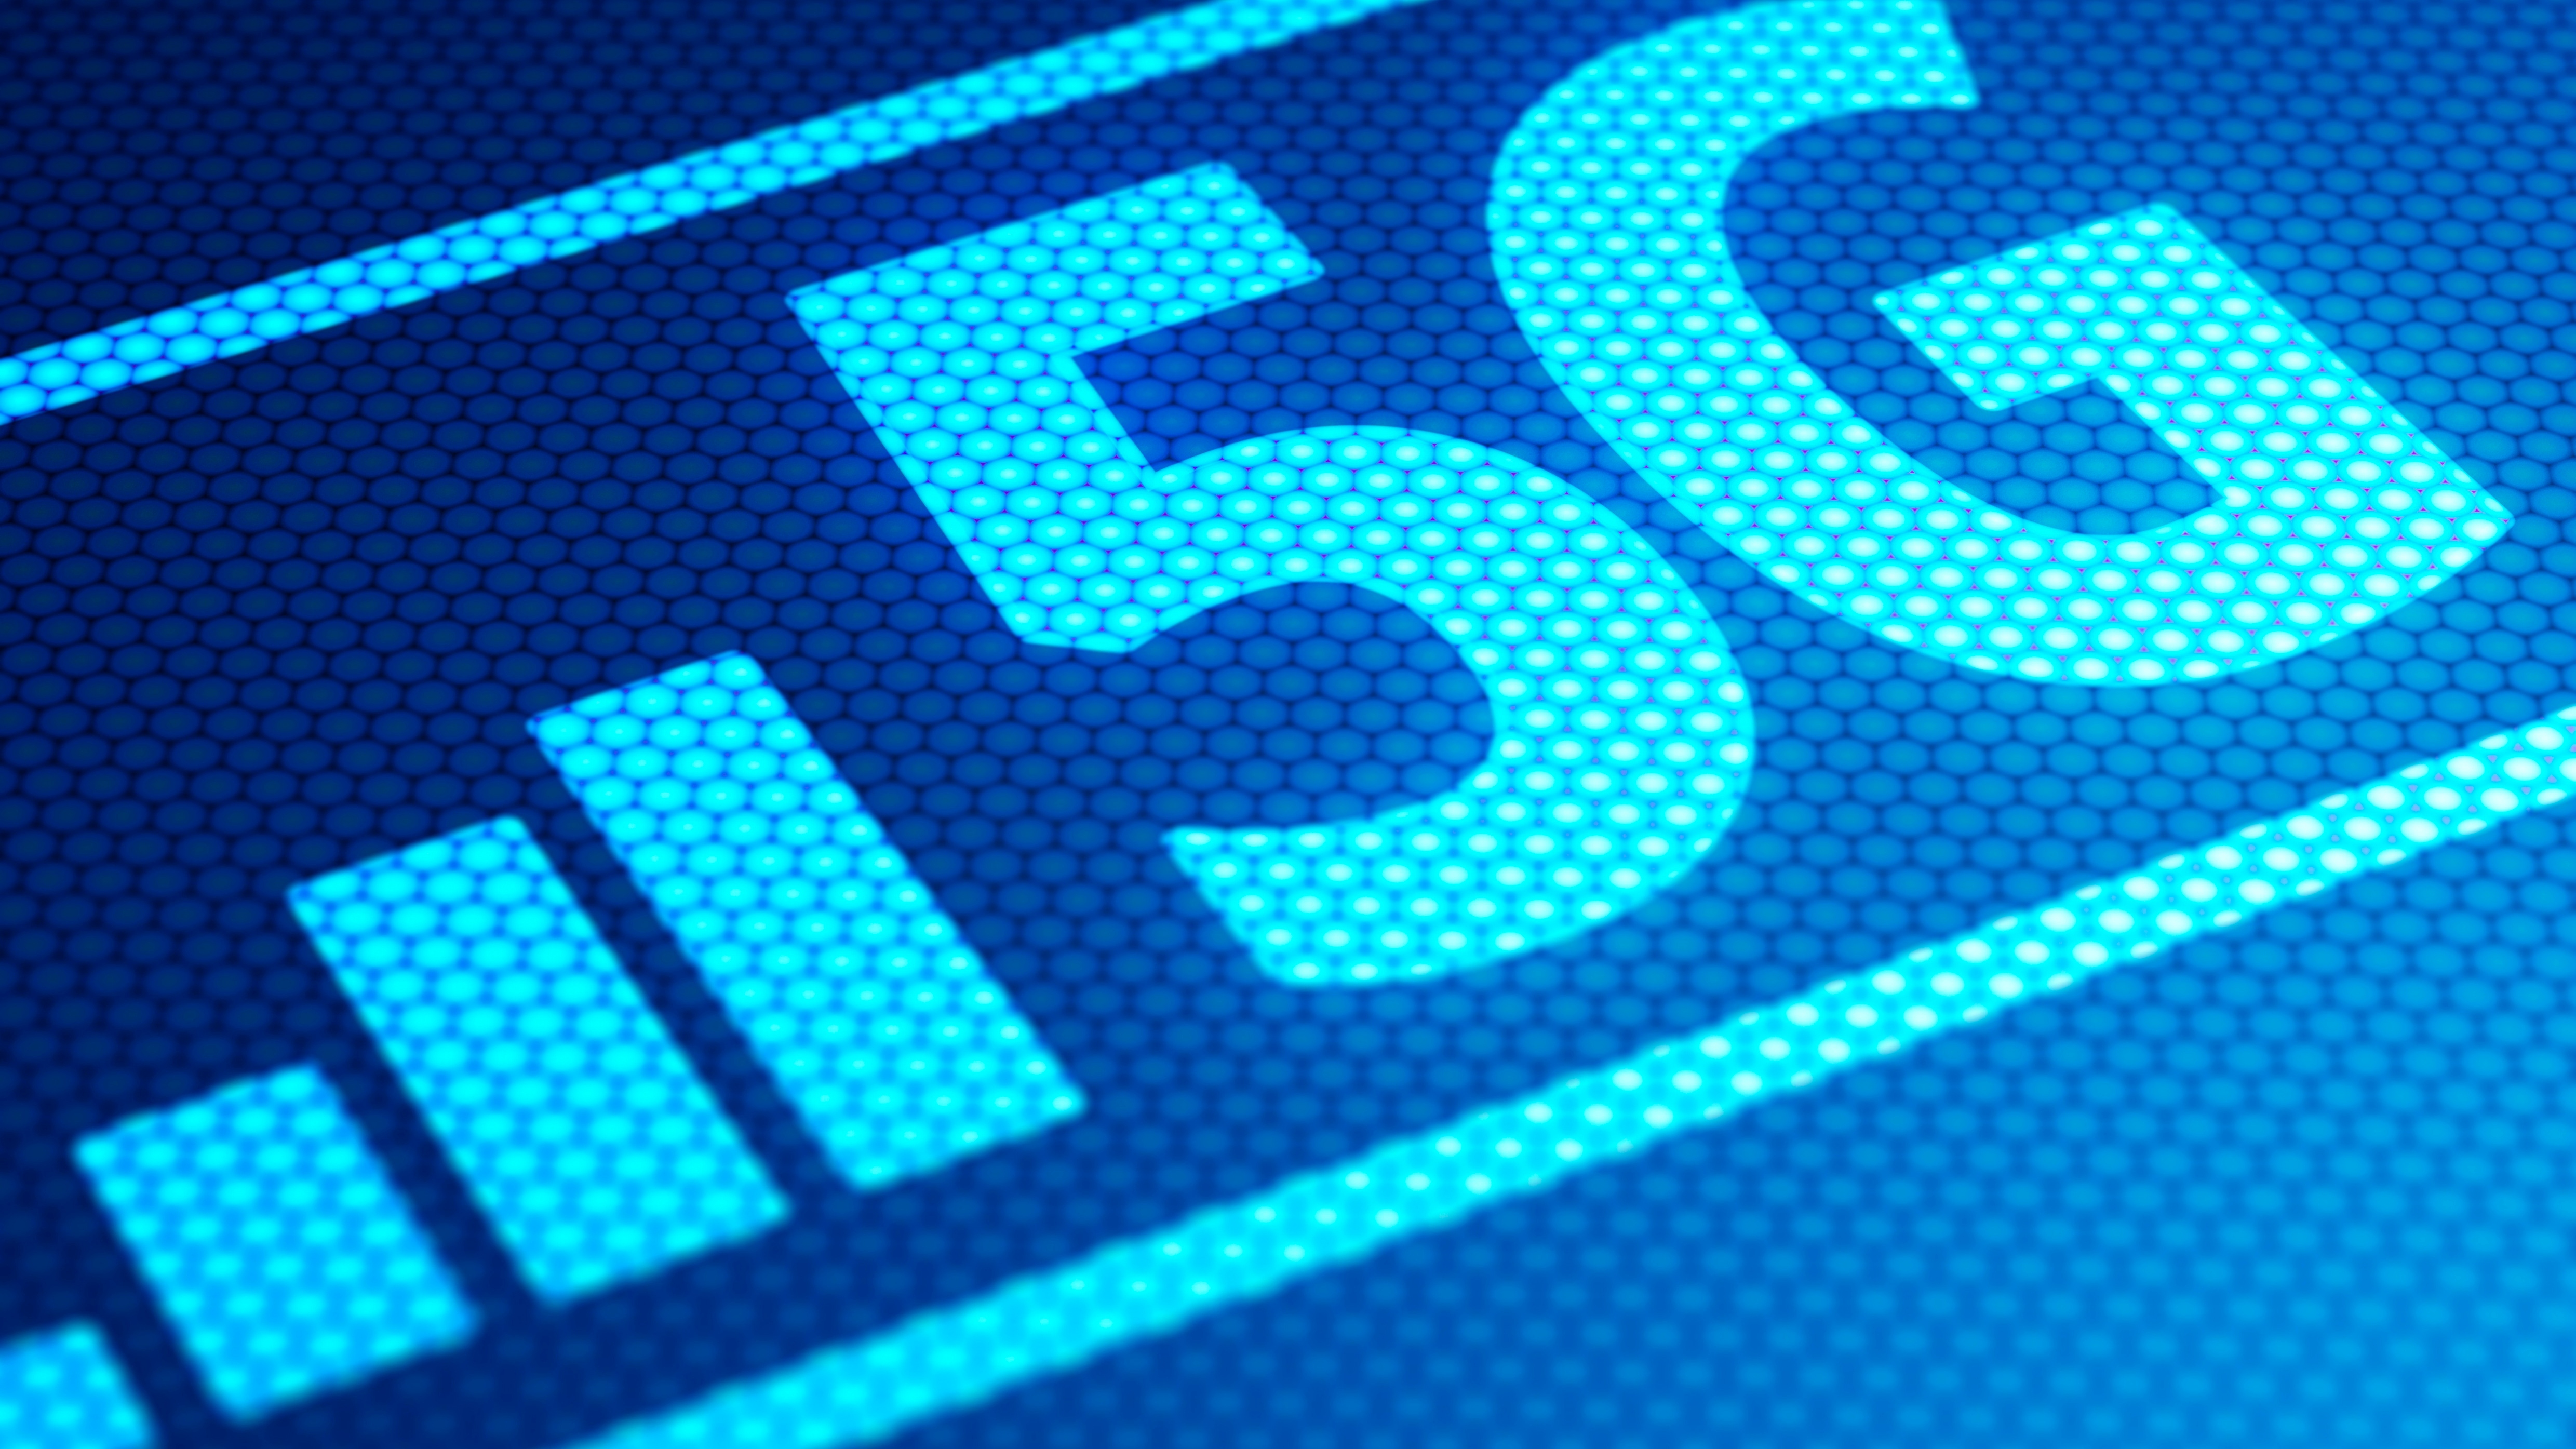 As 5G expands